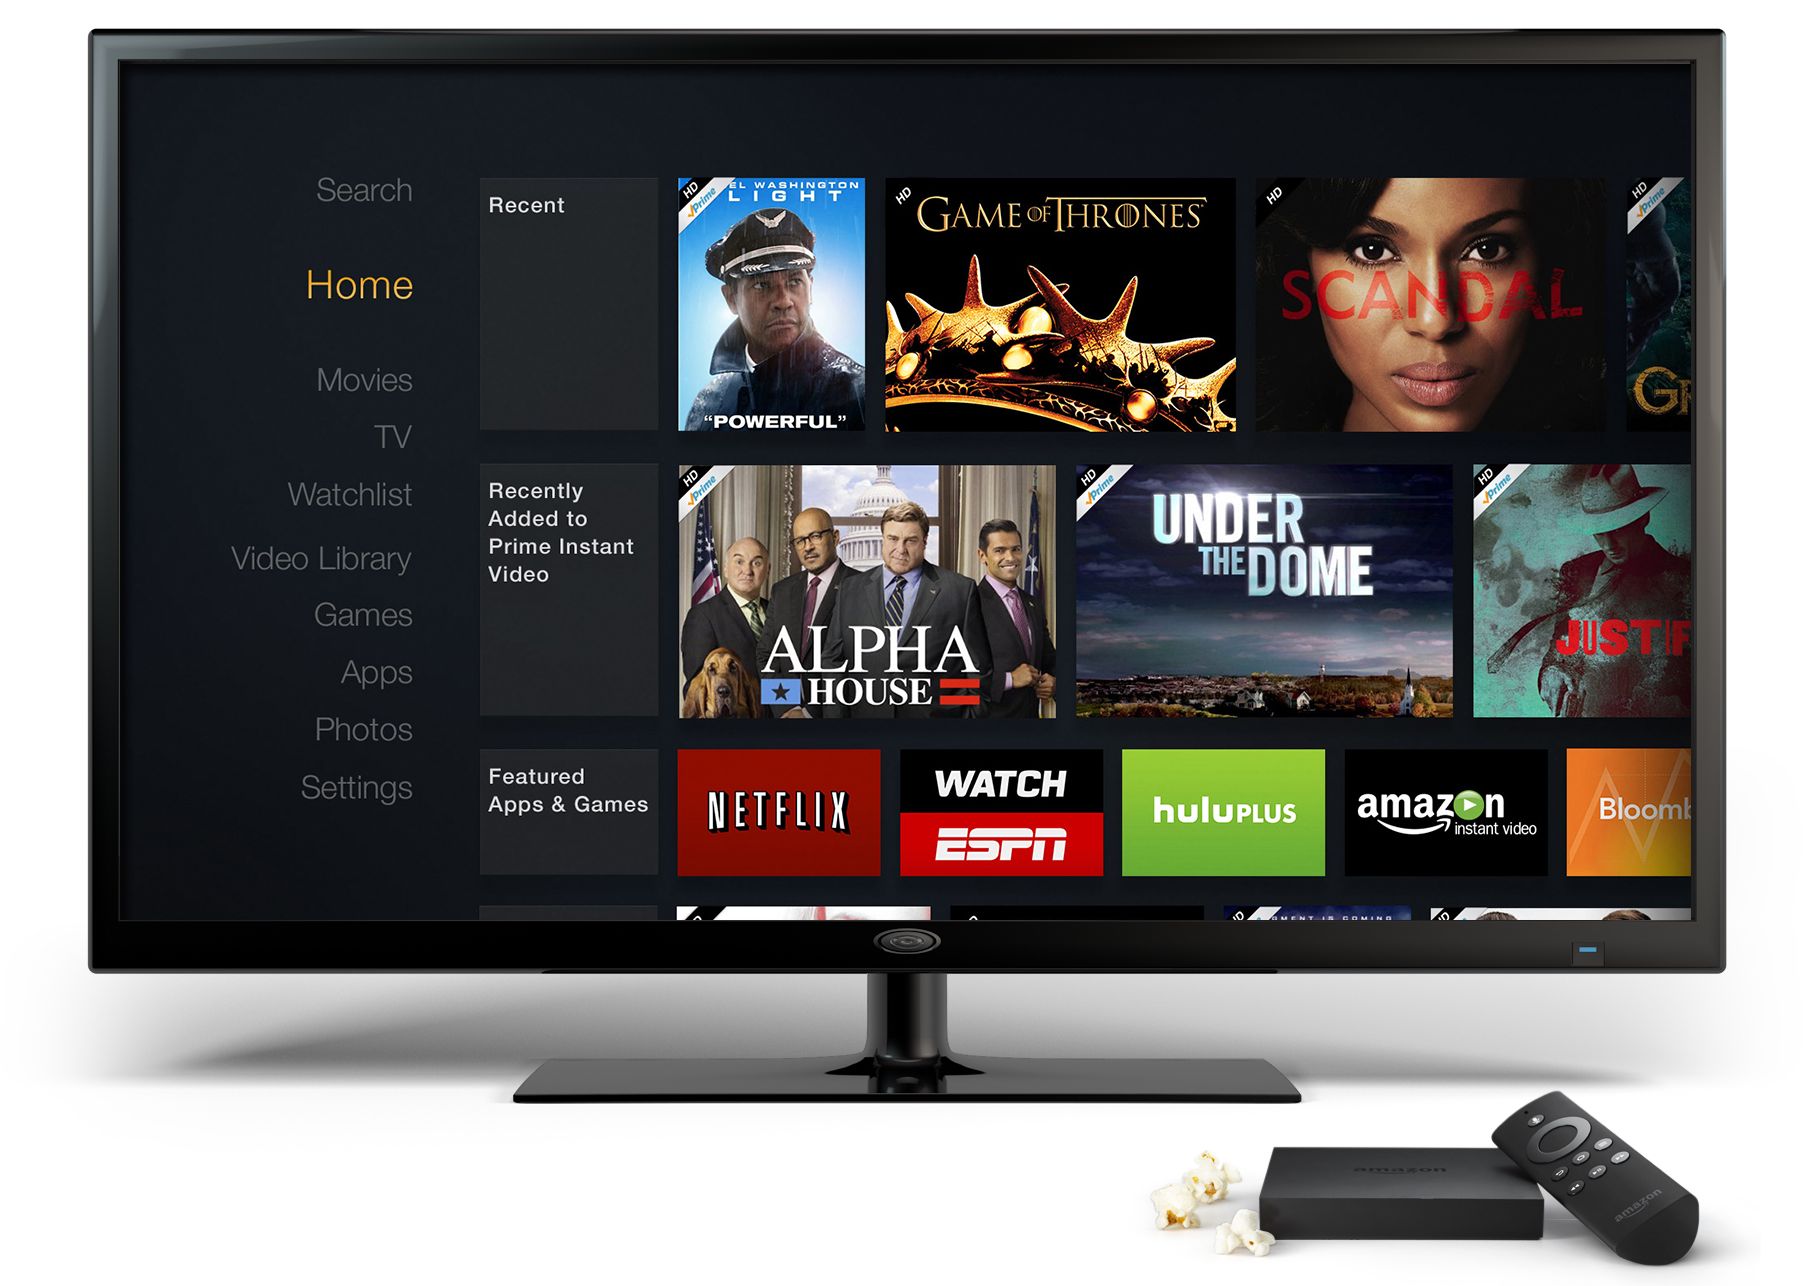 Fire TV companion apps, Second Screen and Remote, hitting